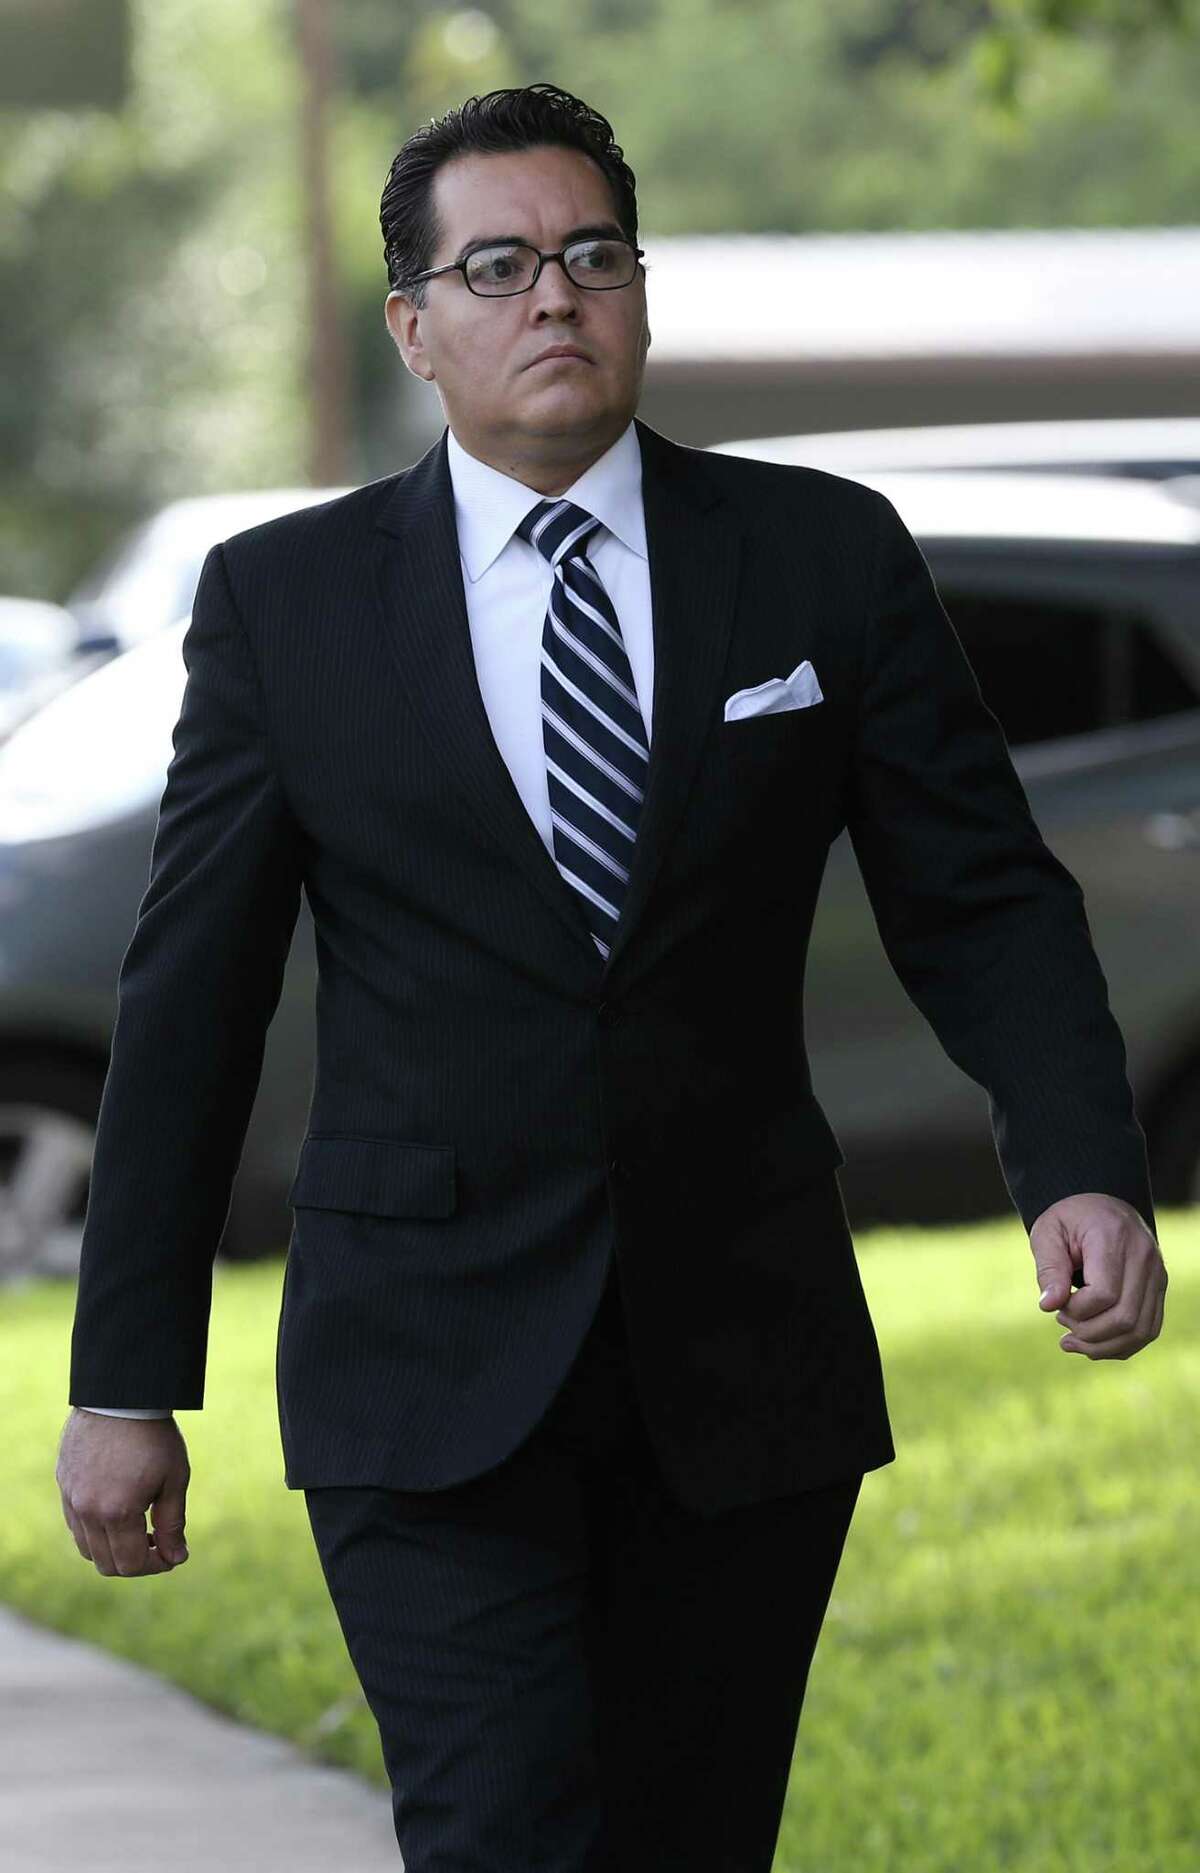 Former Crystal City mayor Ricardo Lopez arrives at Federal Court in Del Rio, Monday, June 19, 2017. Lopez and former city manager/attorney James Jonas are on trial facing multiple public corruption charges that include taking bribes and kickbacks. They were arrested along with two council members and a former one in February of 2016.